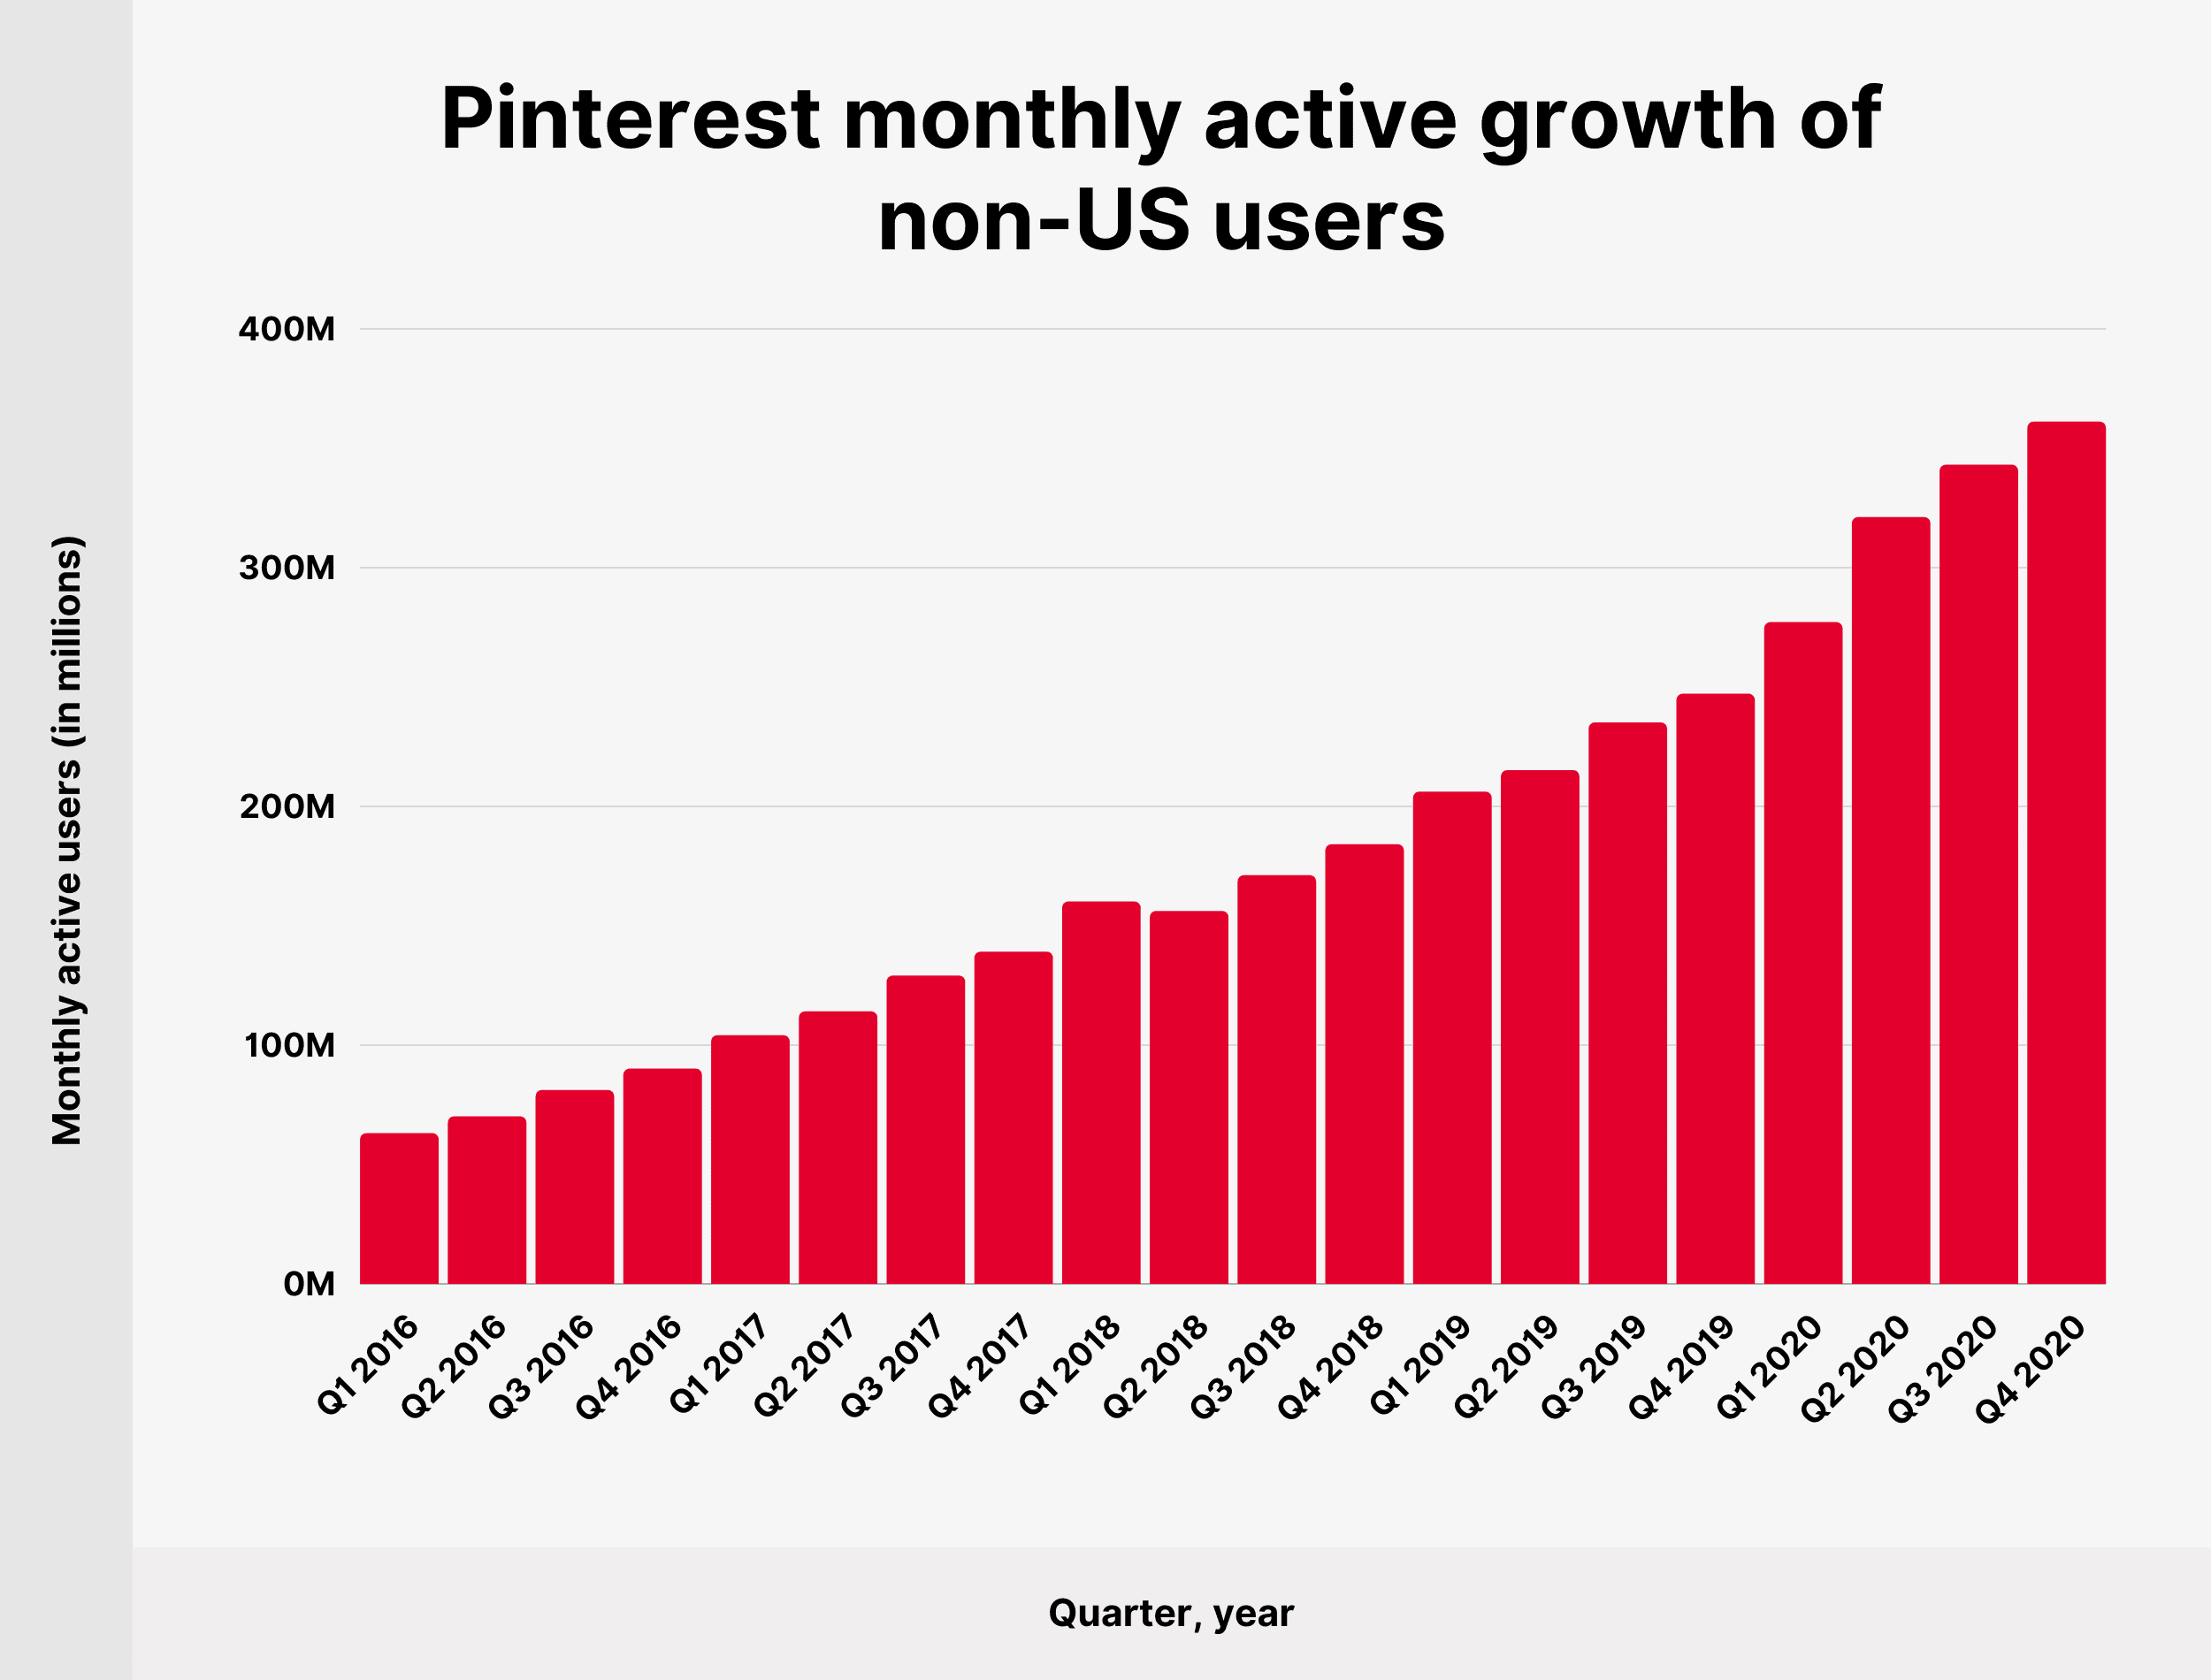 Pinterest monthly active growth of non-US users